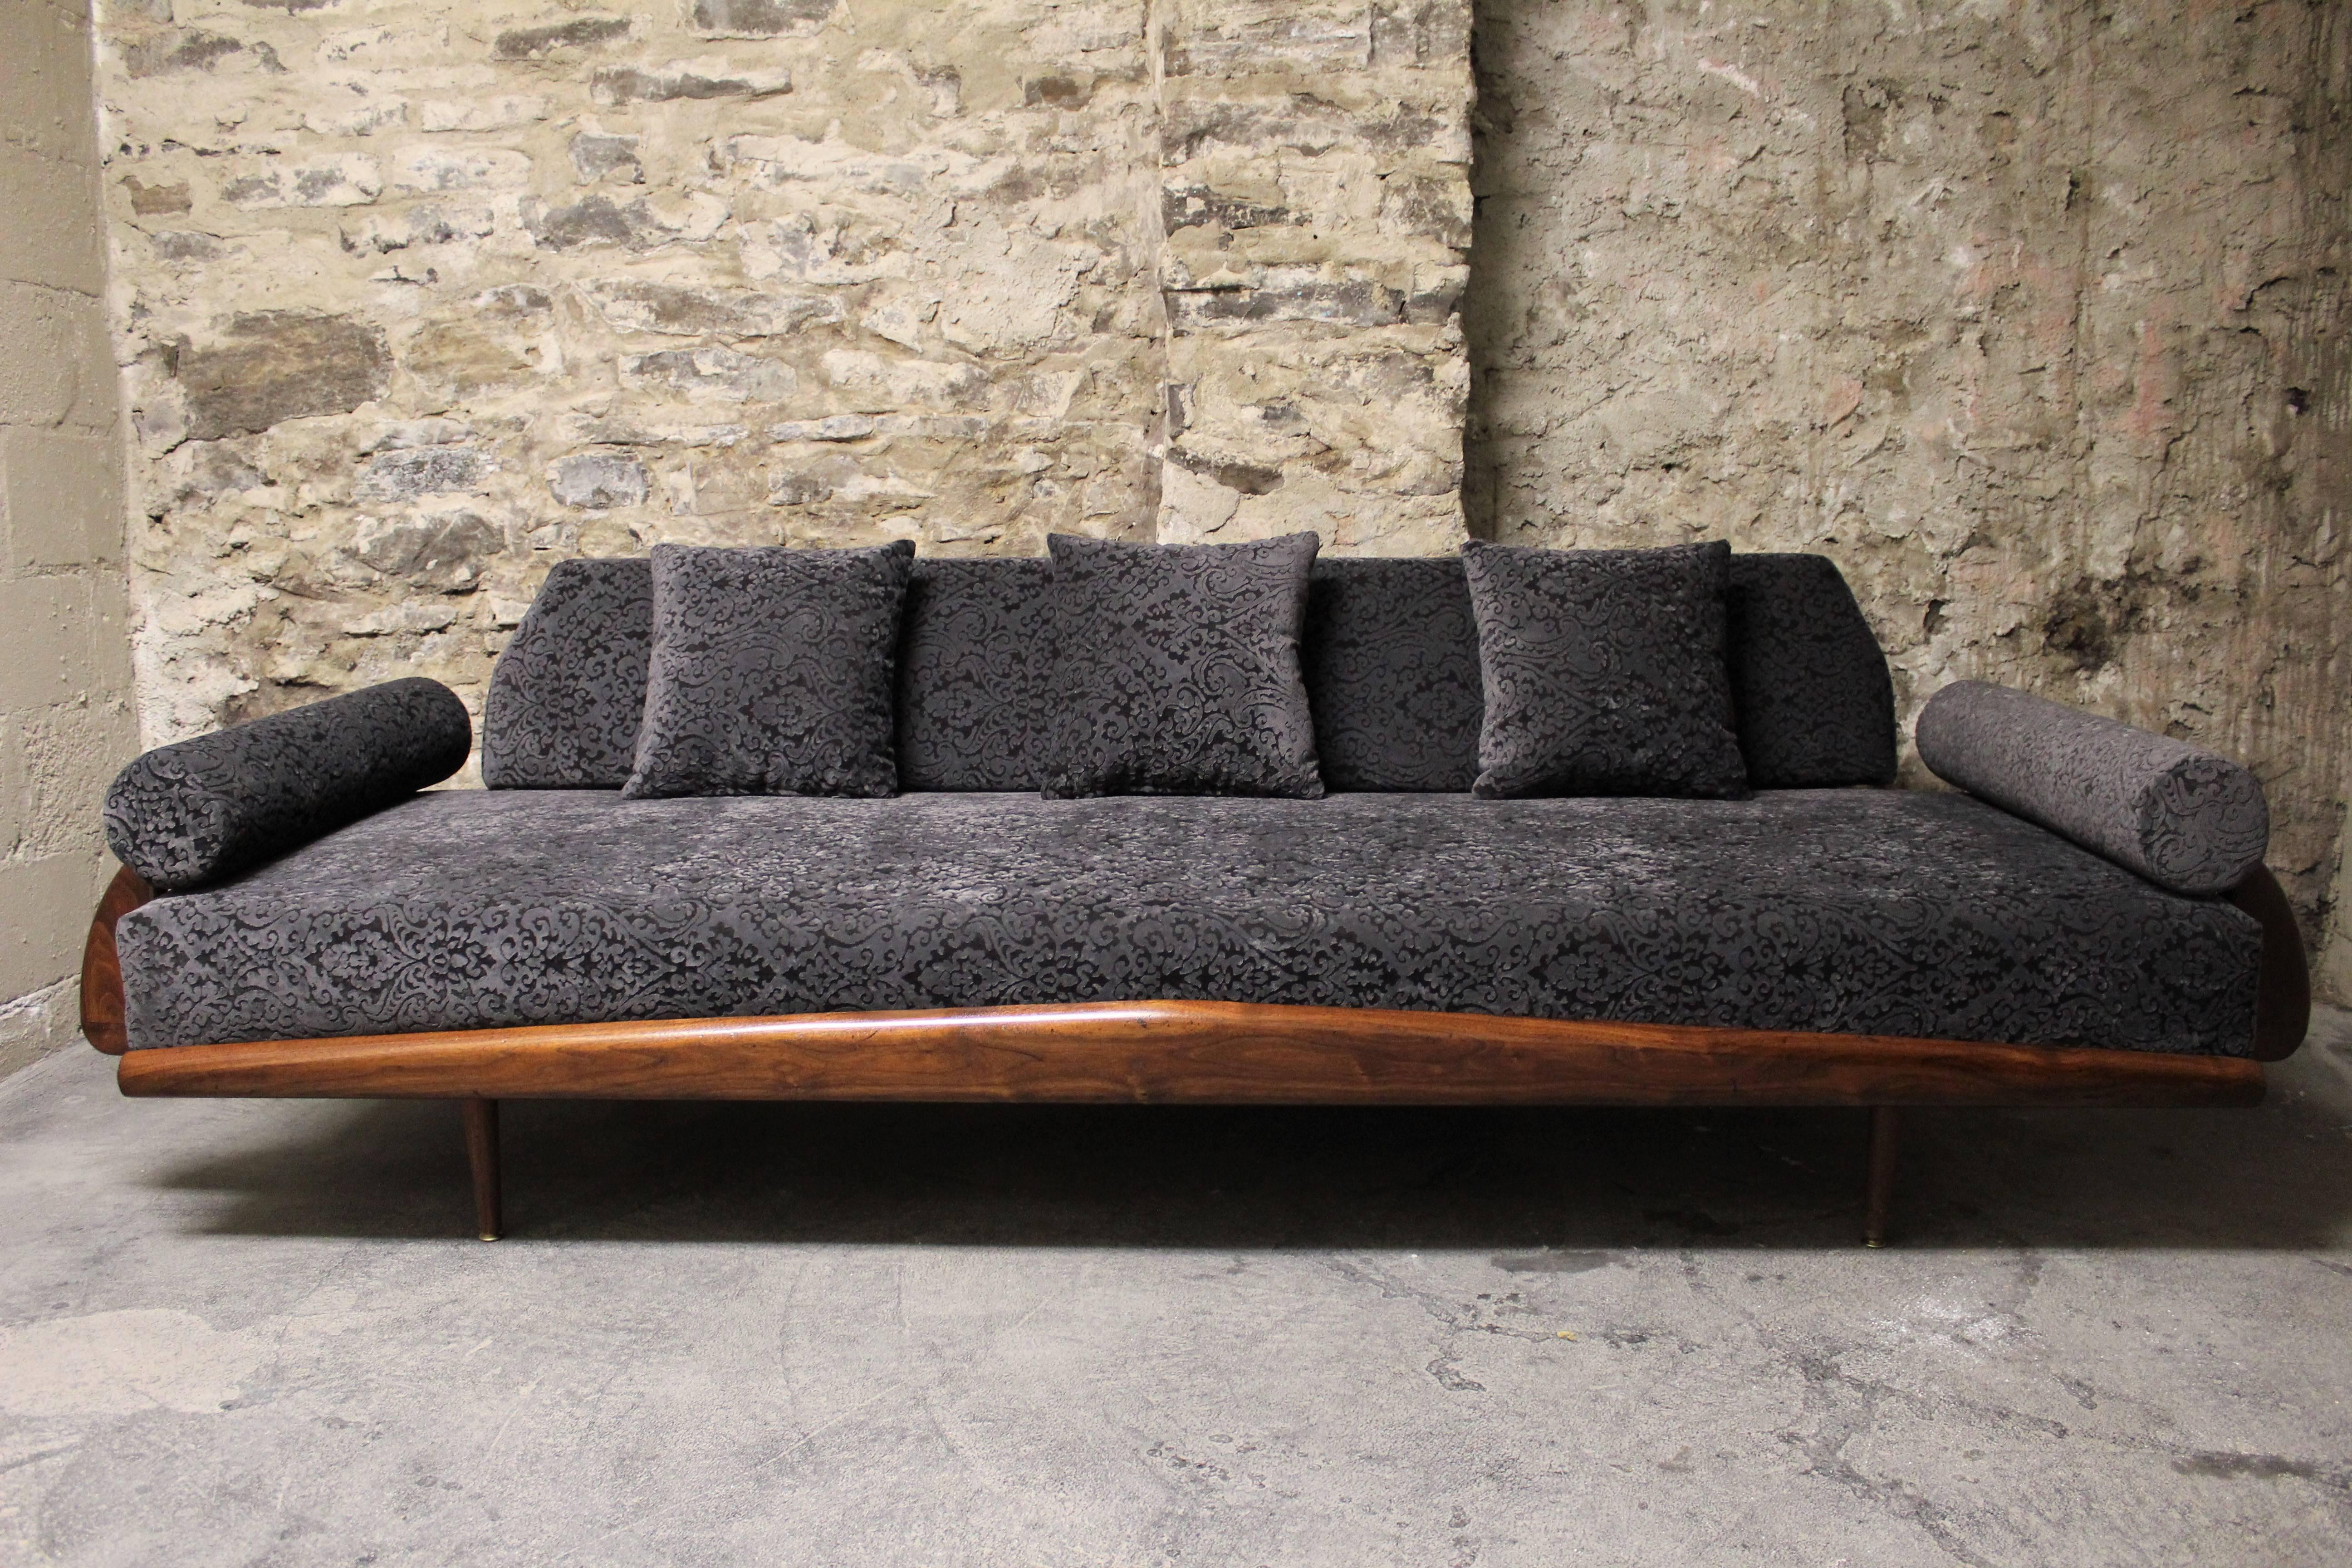 Stunning Adrian Pearsall sofa for craft associates. Walnut frame and recently re-upholstered.